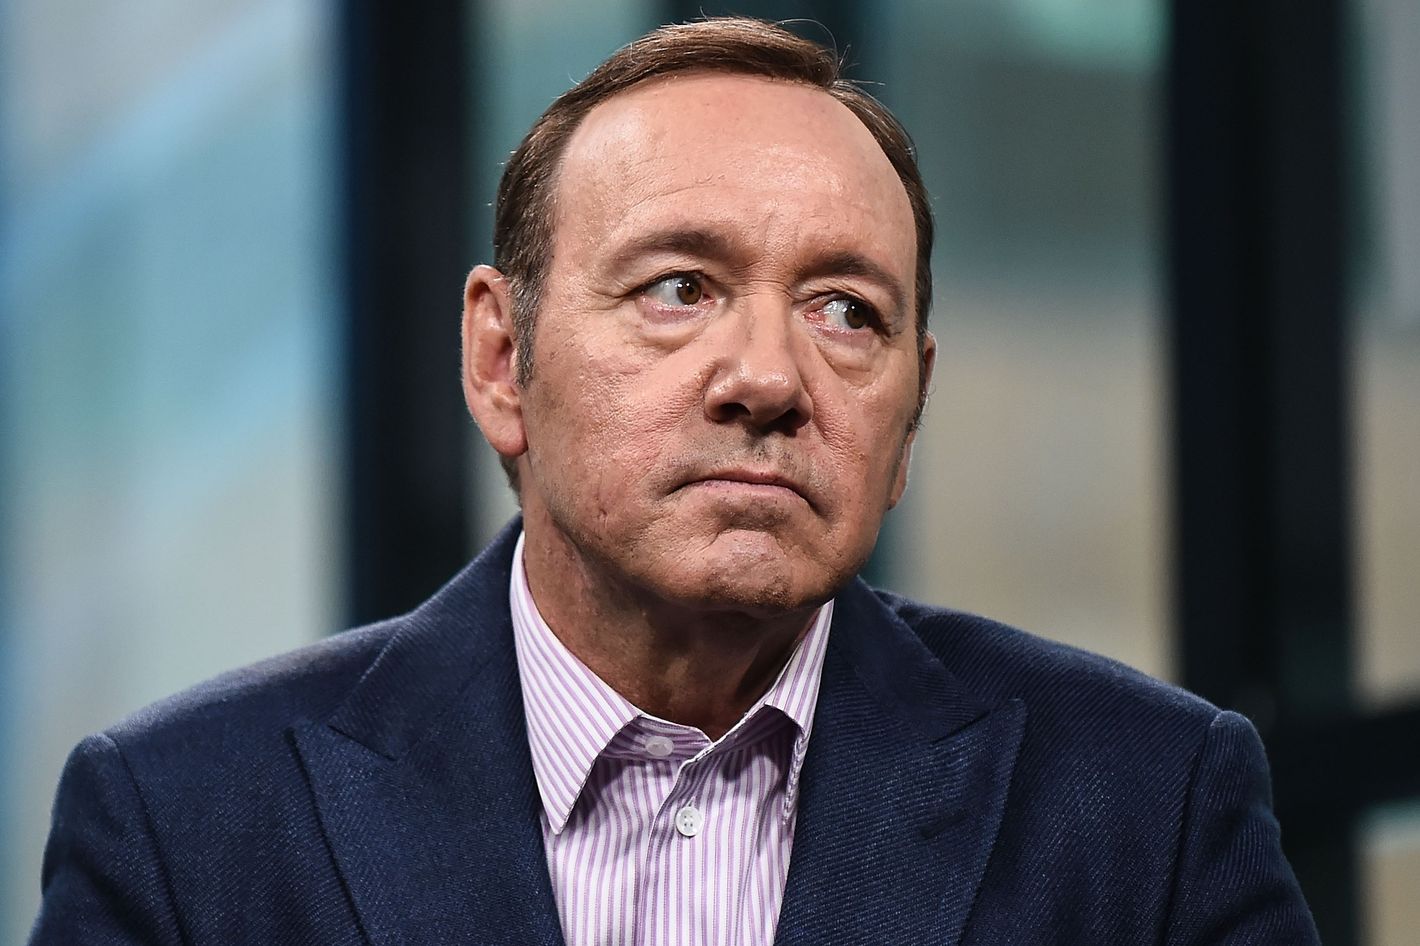 Kevin Spacey Man Alleges Sexual Relationship at 14 pic image